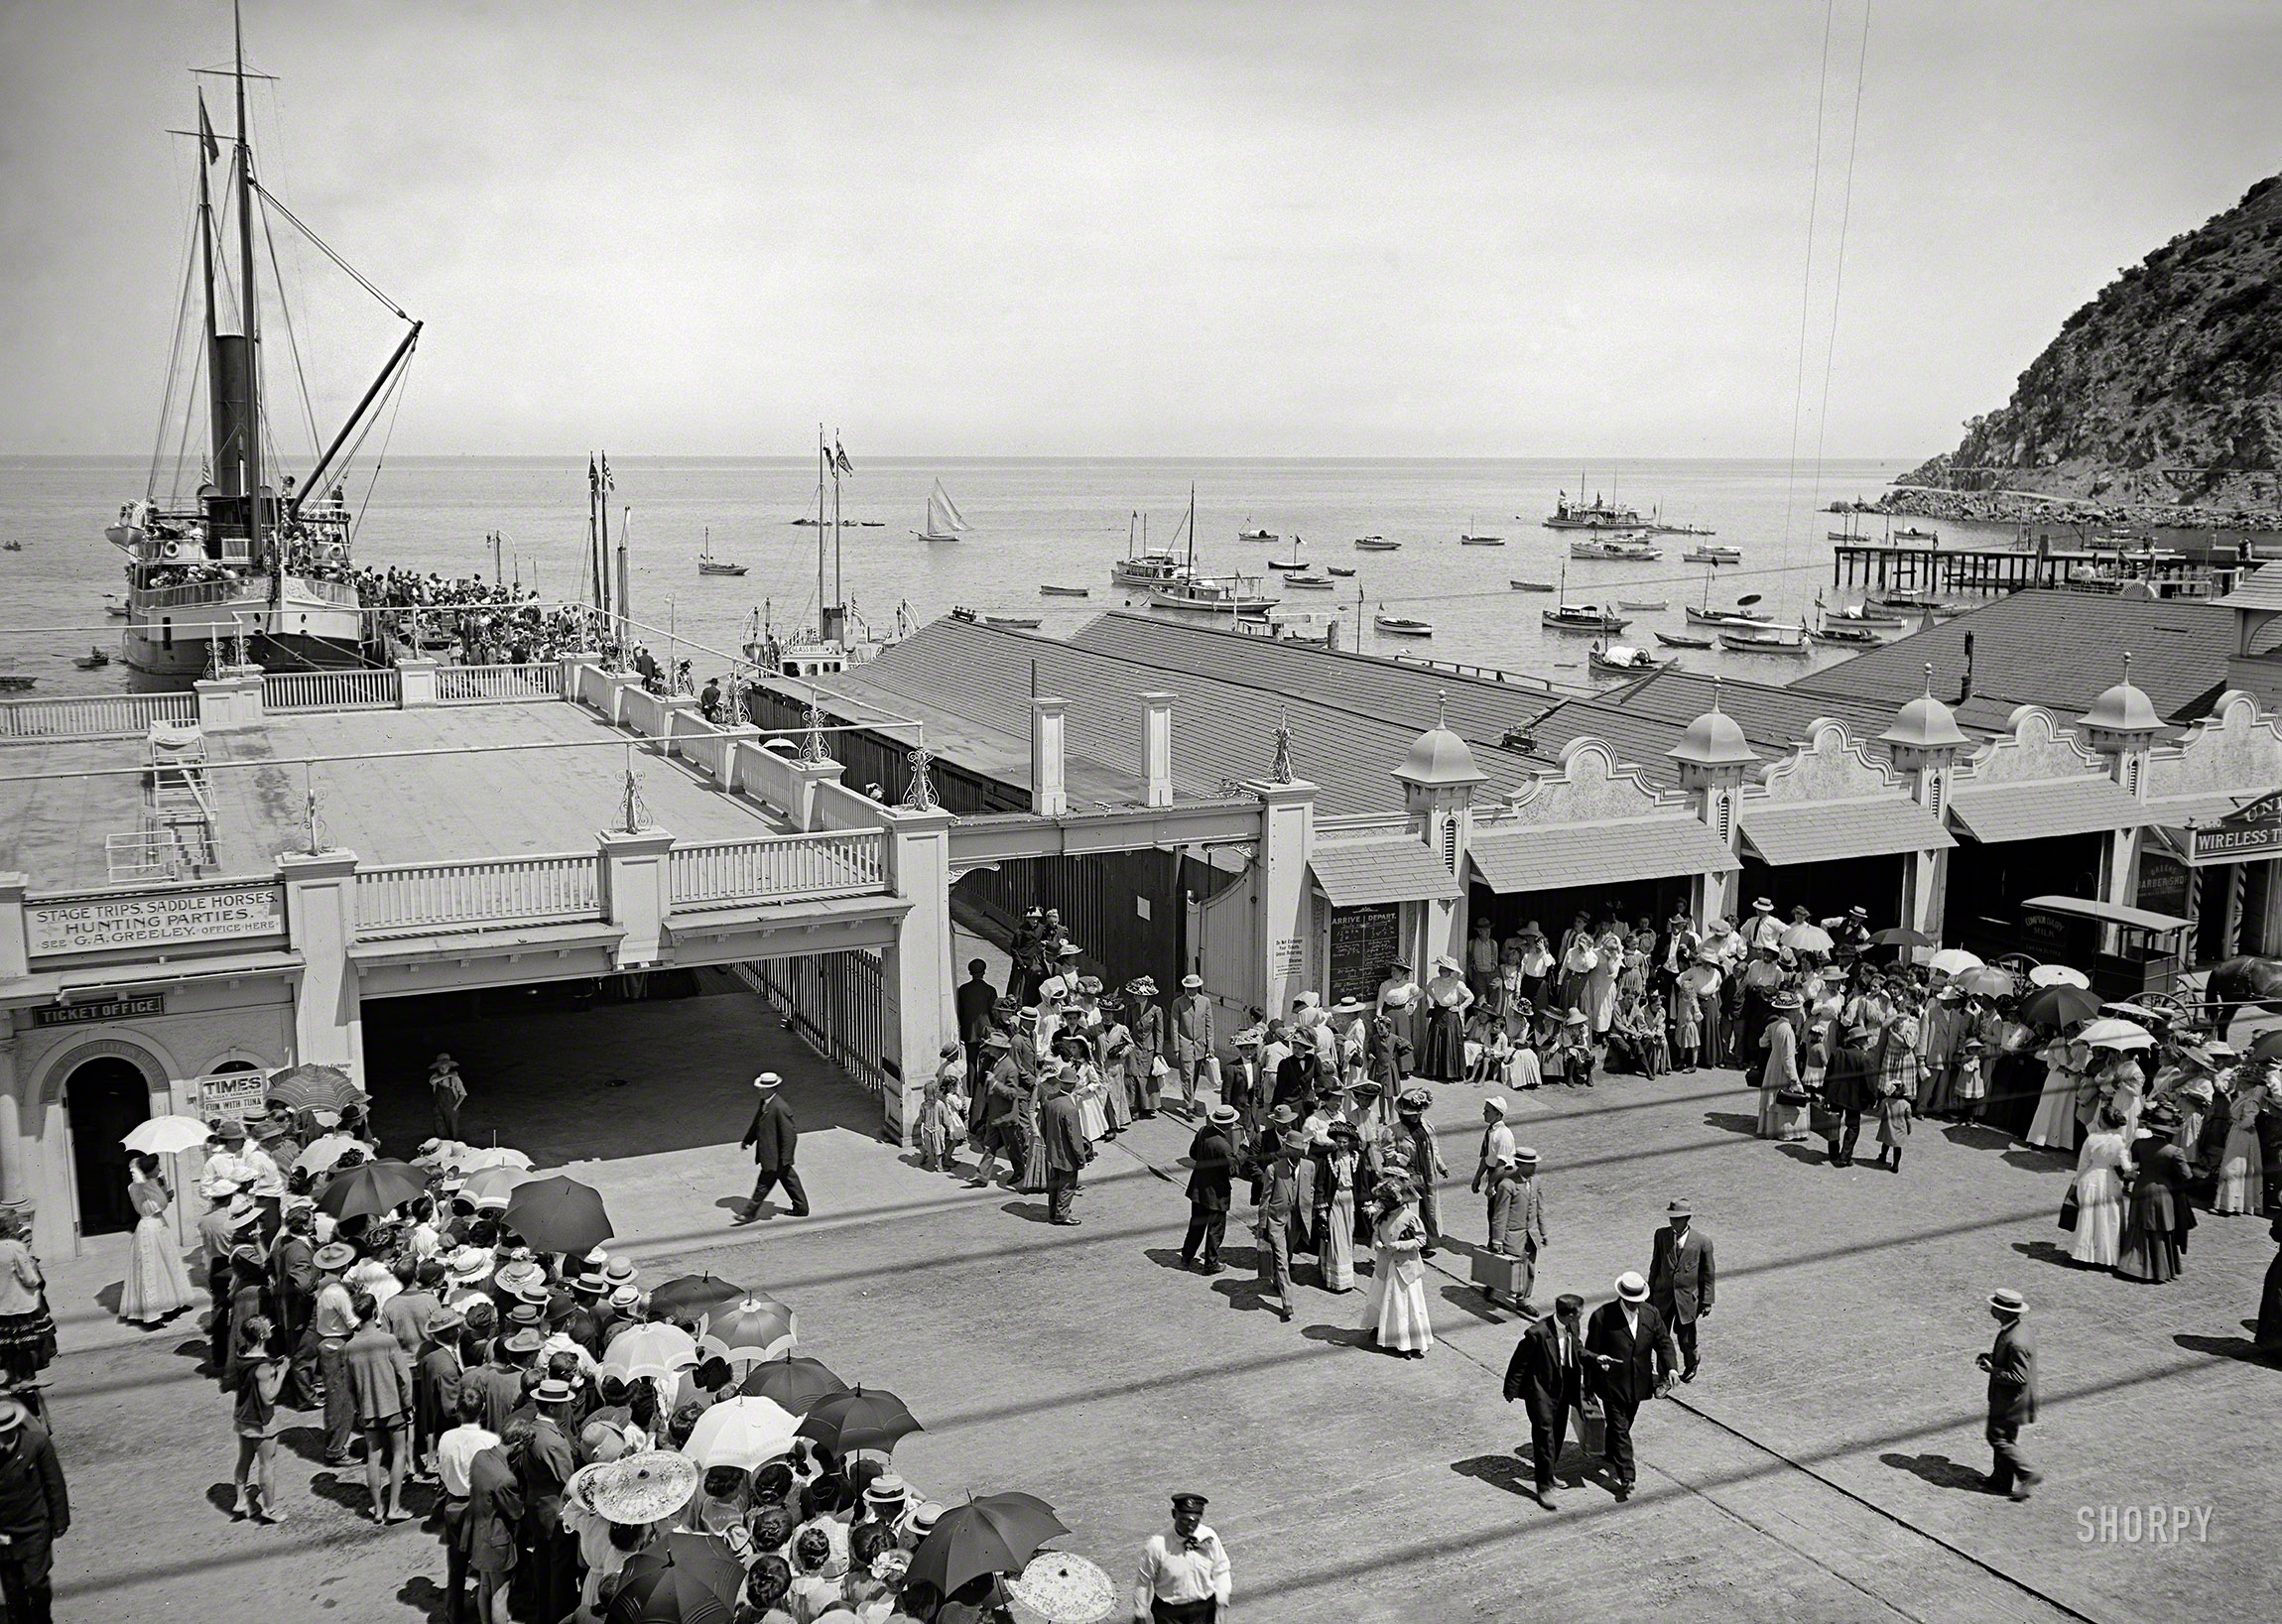 August 1915. "Steamship ticket office at pier, Avalon, Catalina Island, California." 5x7 inch dry plate glass negative, Detroit Publishing Company. View full size.